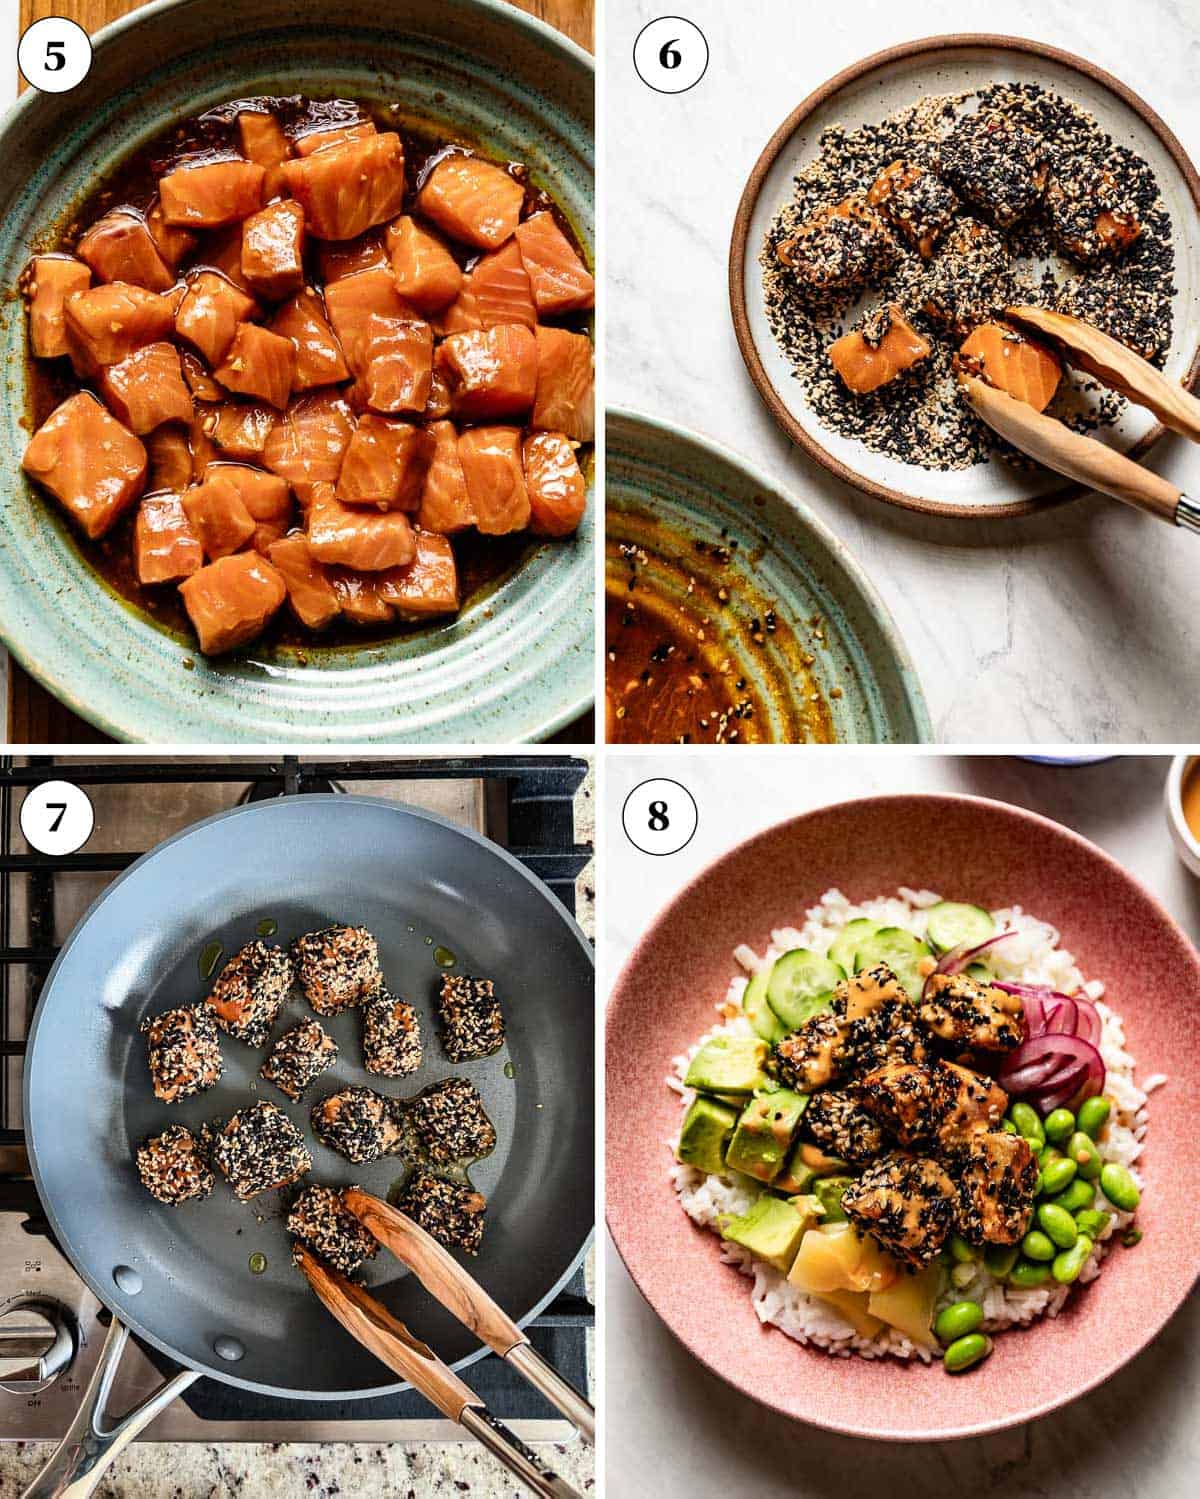 A collage of images showing how to crust and cook salmon cubes with sesame seeds.